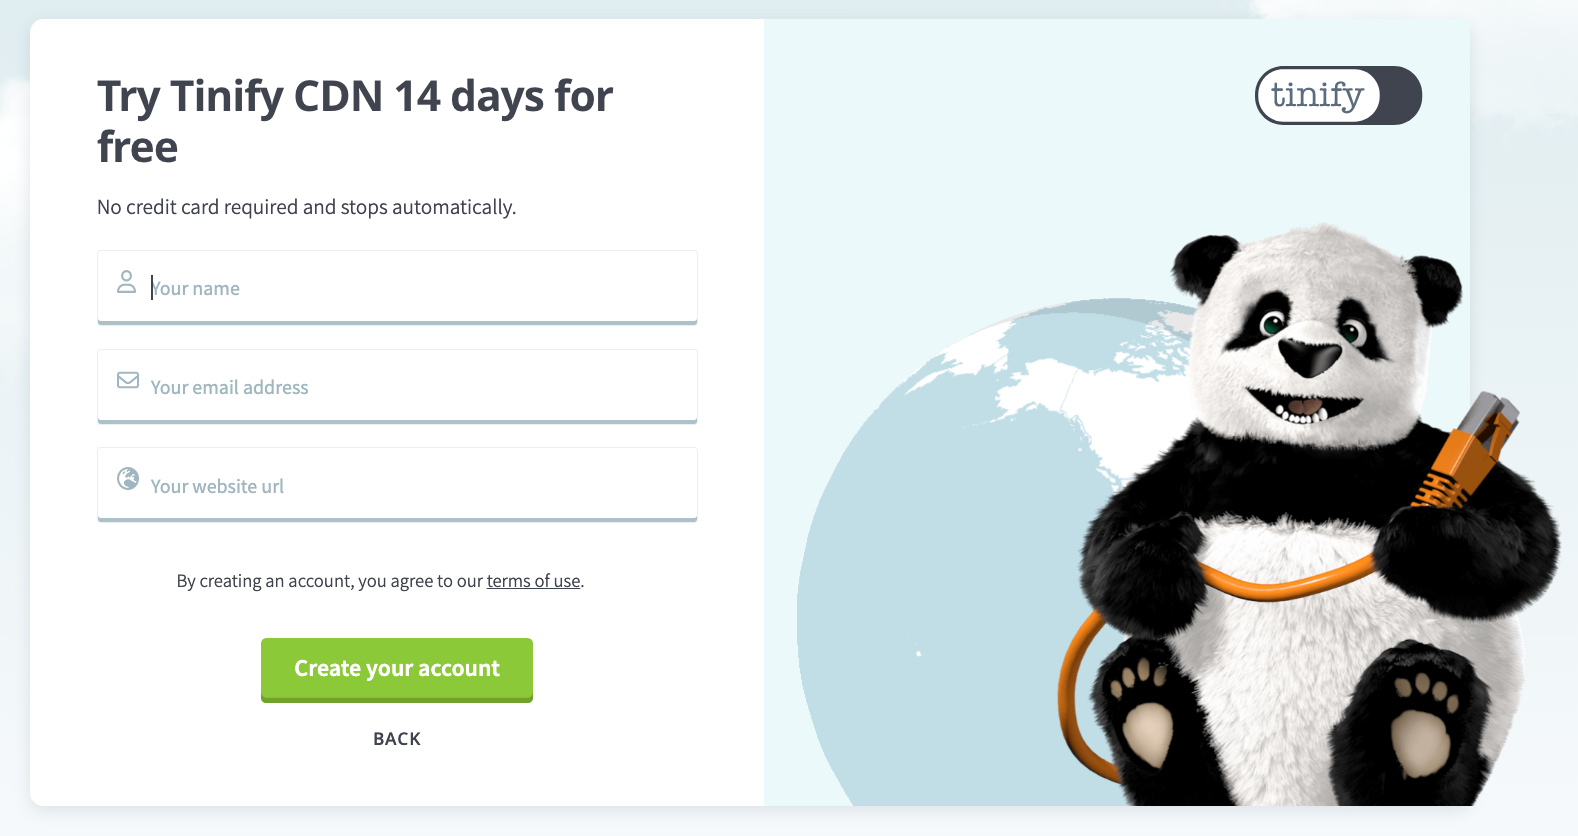 Screenshot - Try Tinify CDN 14 days for free